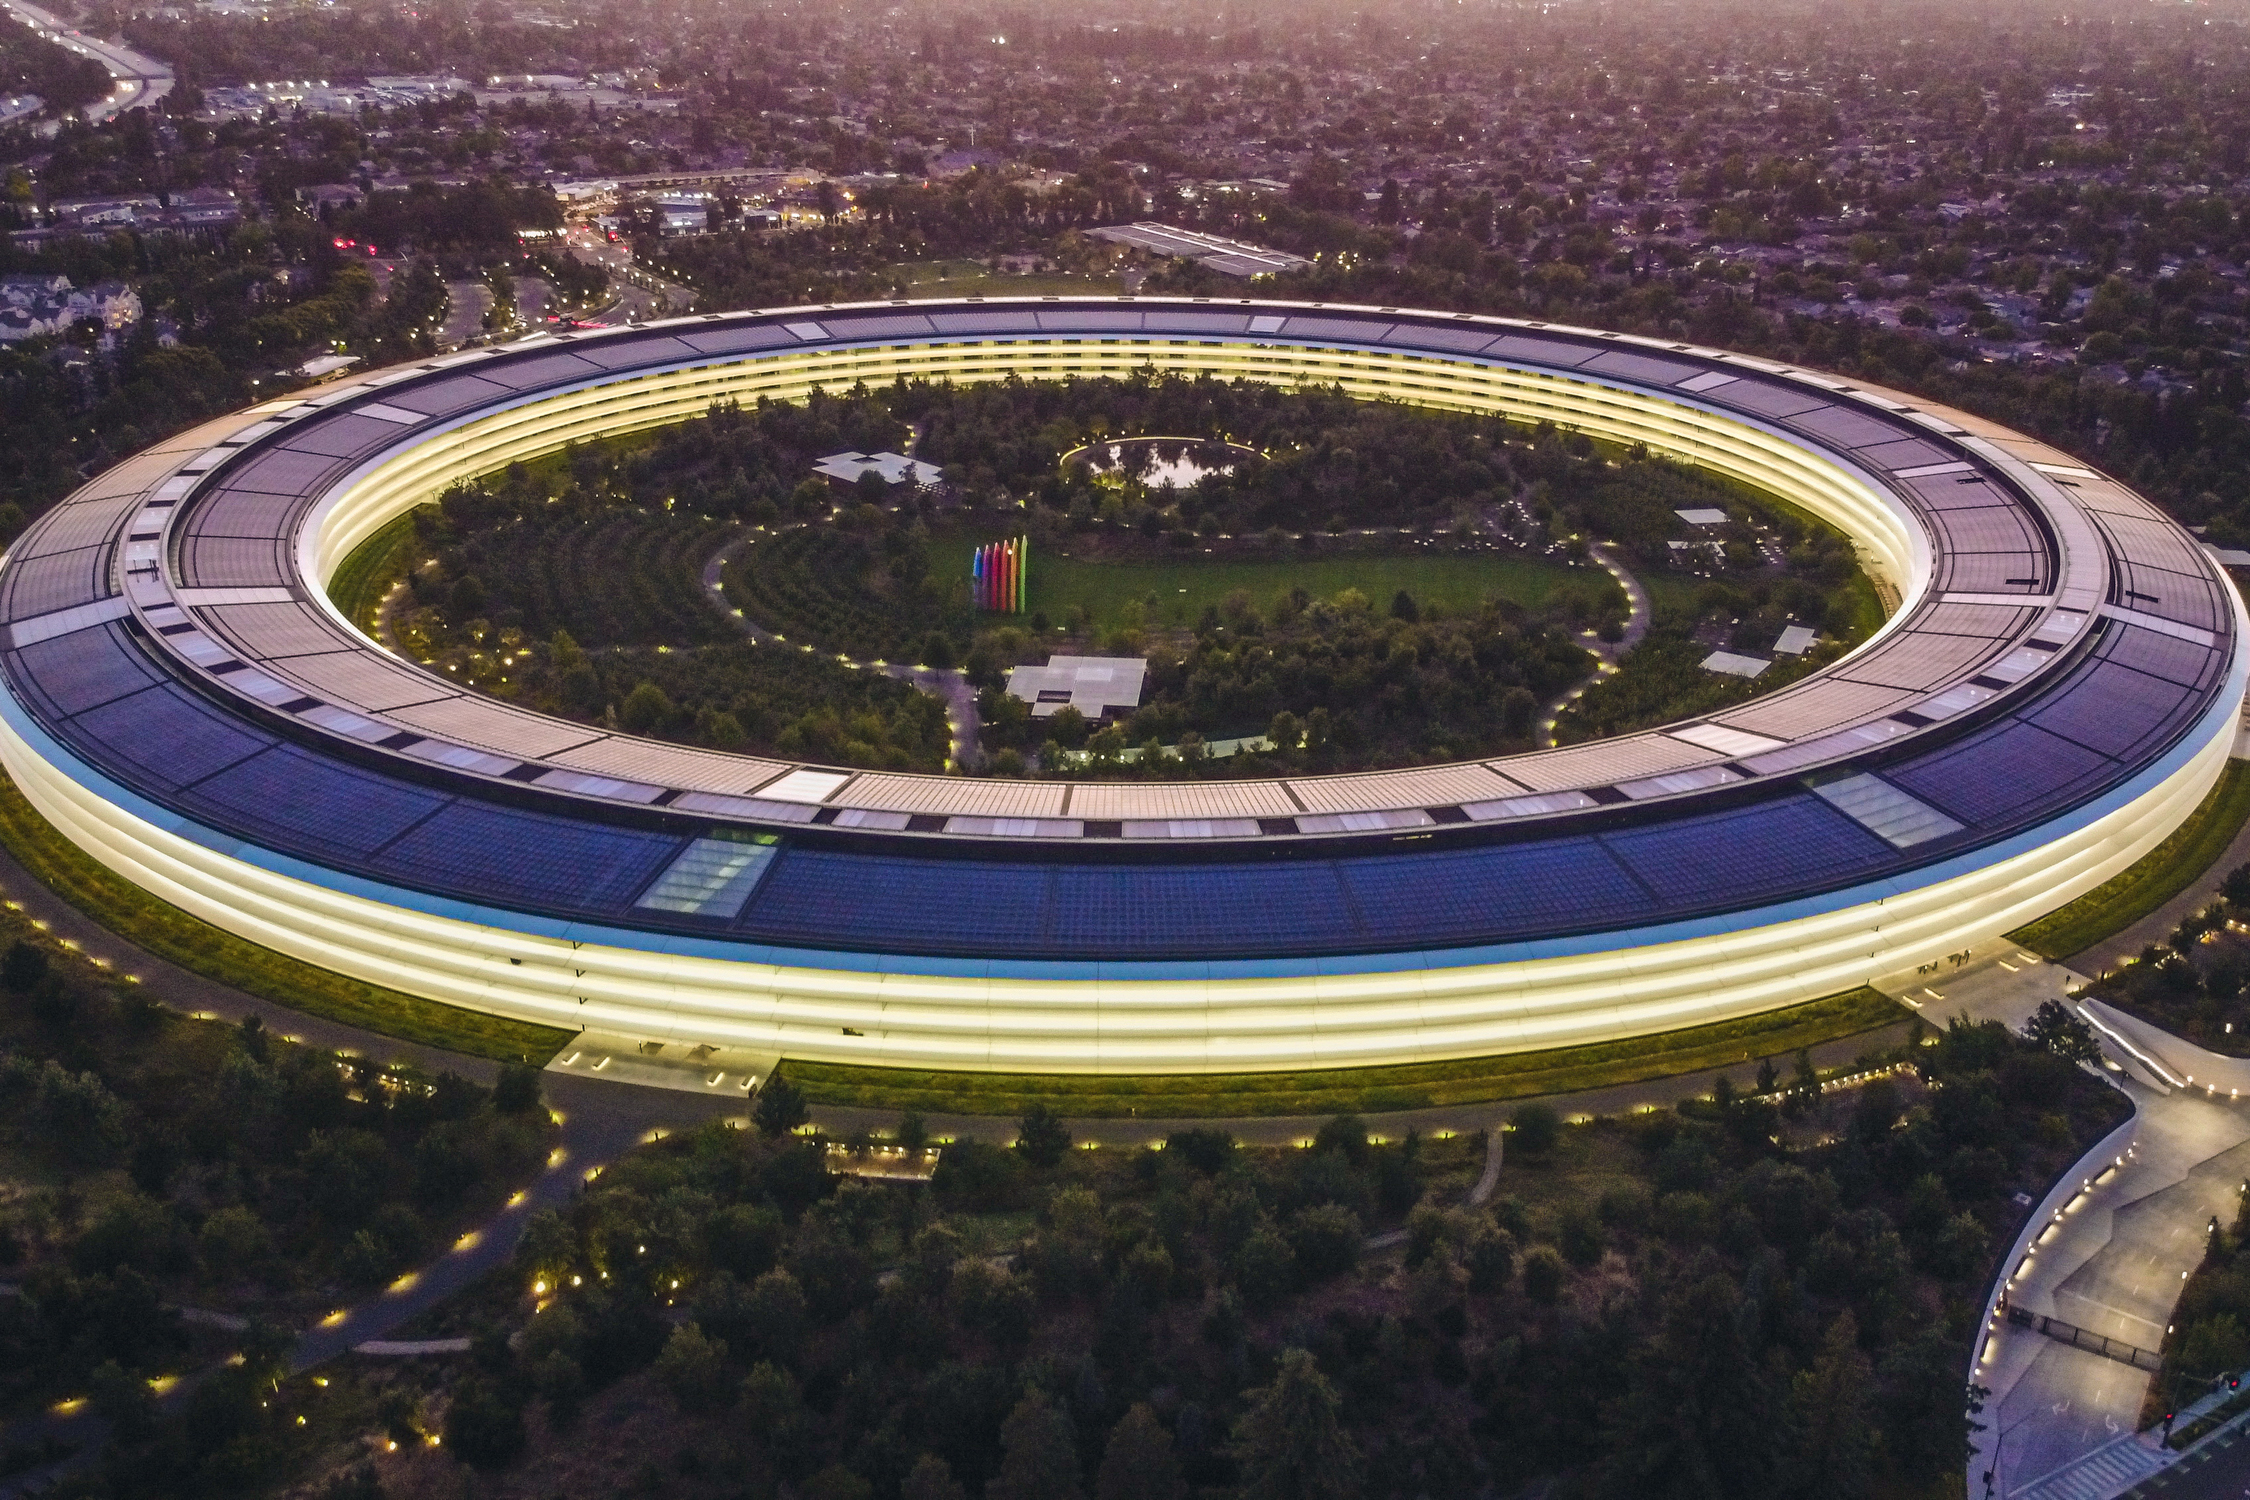 APPLE HEADQUARTERS - Weakened: New ecosystem takes power from big tech -